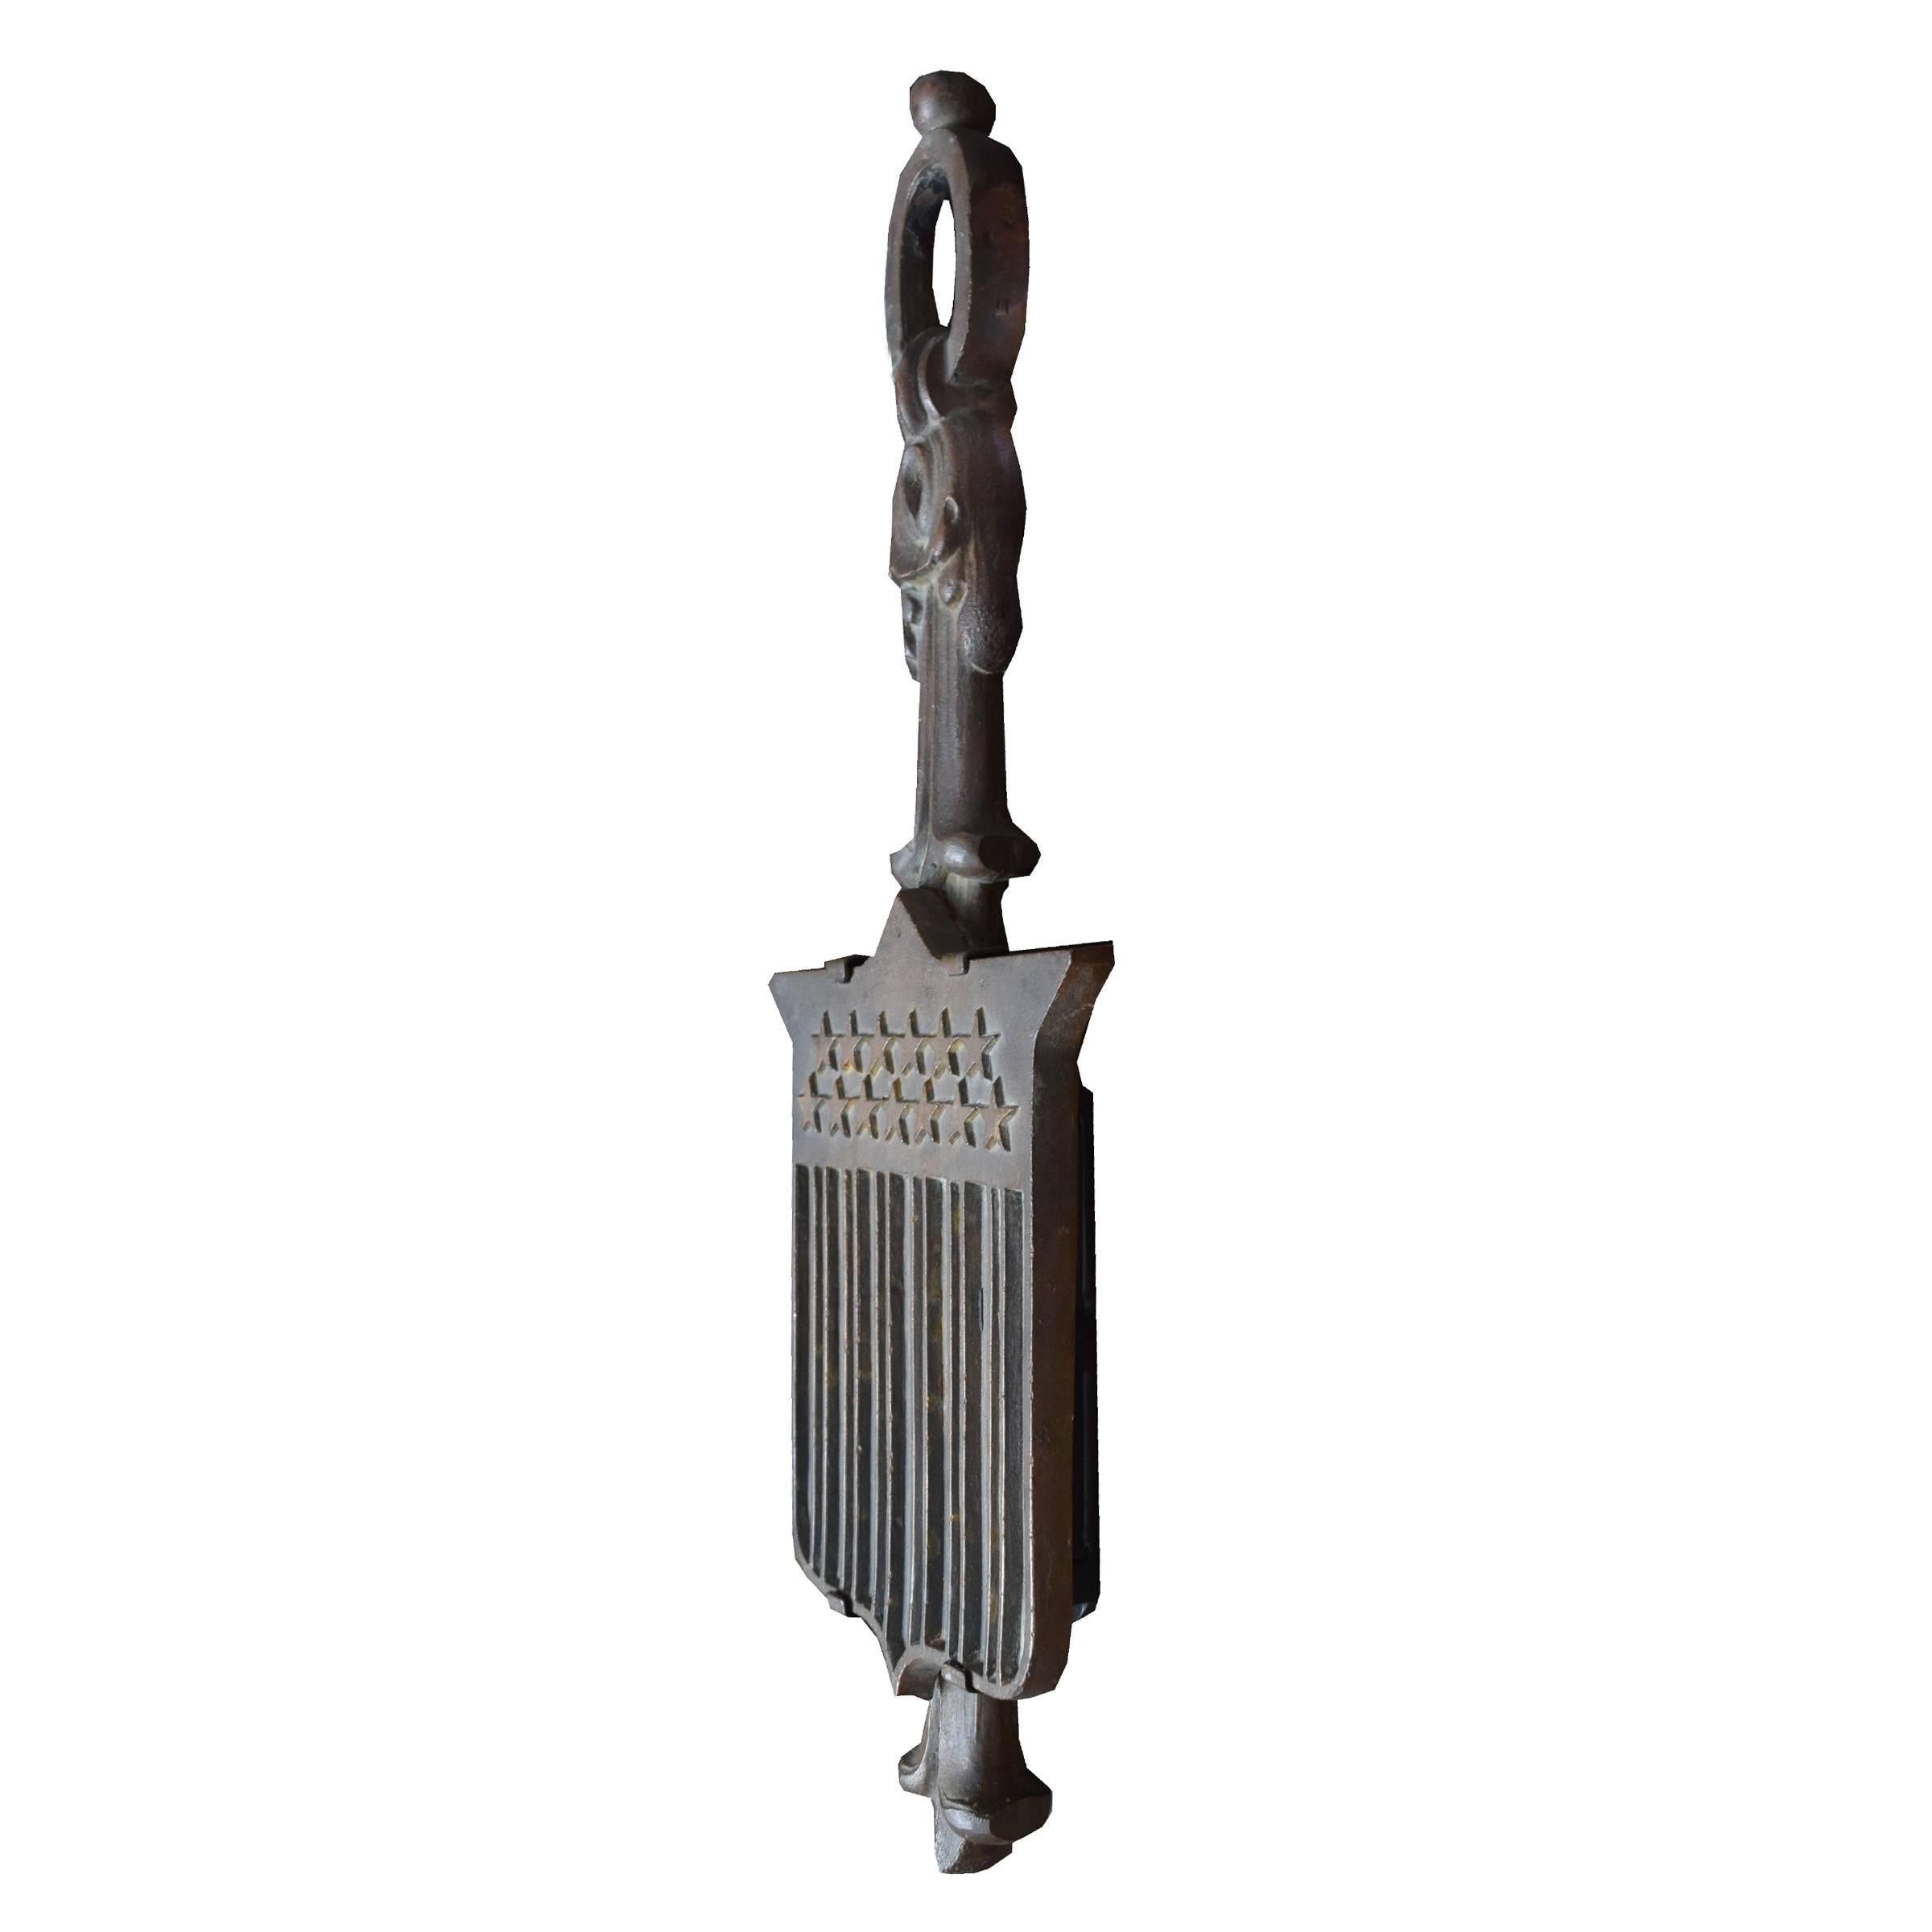 American Set of Three Bronze Balusters from the Chicago Federal Building